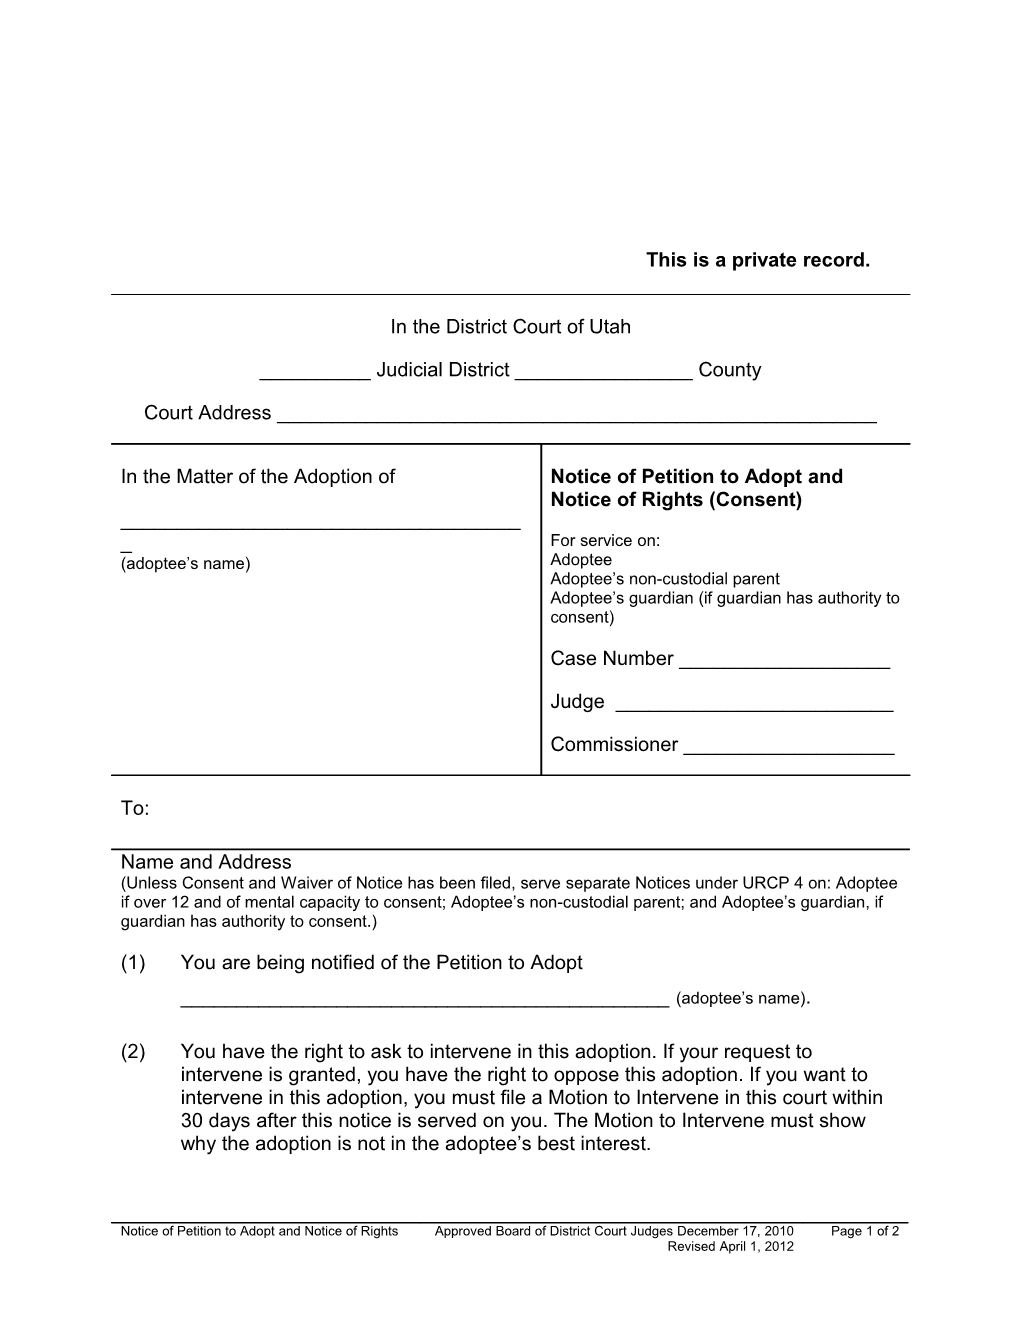 Notice of Petition to Adopt and Notice of Rights (Consent)